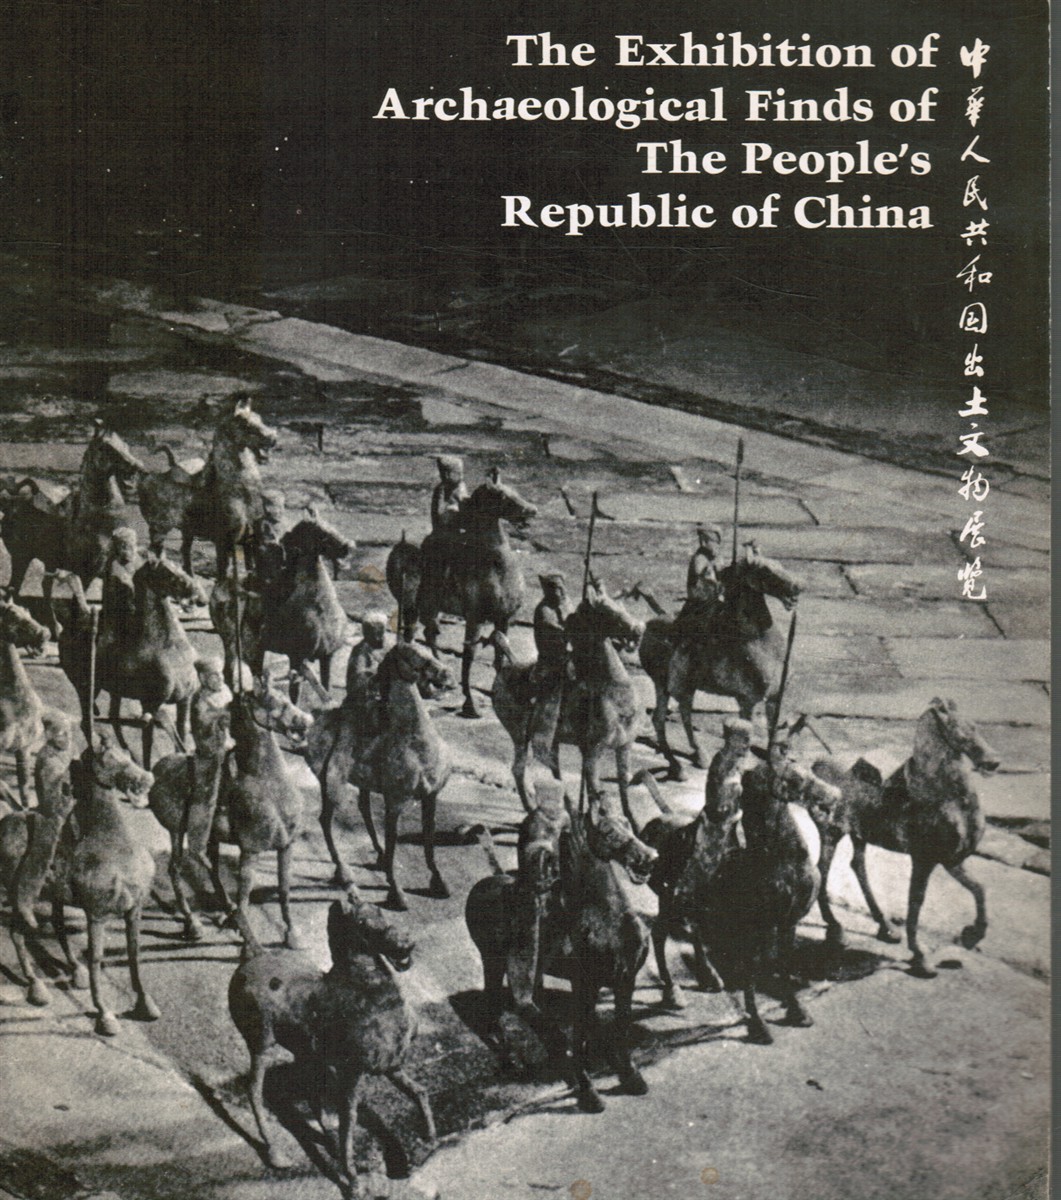 NATIONAL GALLERY OF ART - The Exhibition of Archaeological Finds of the People's Republic of China